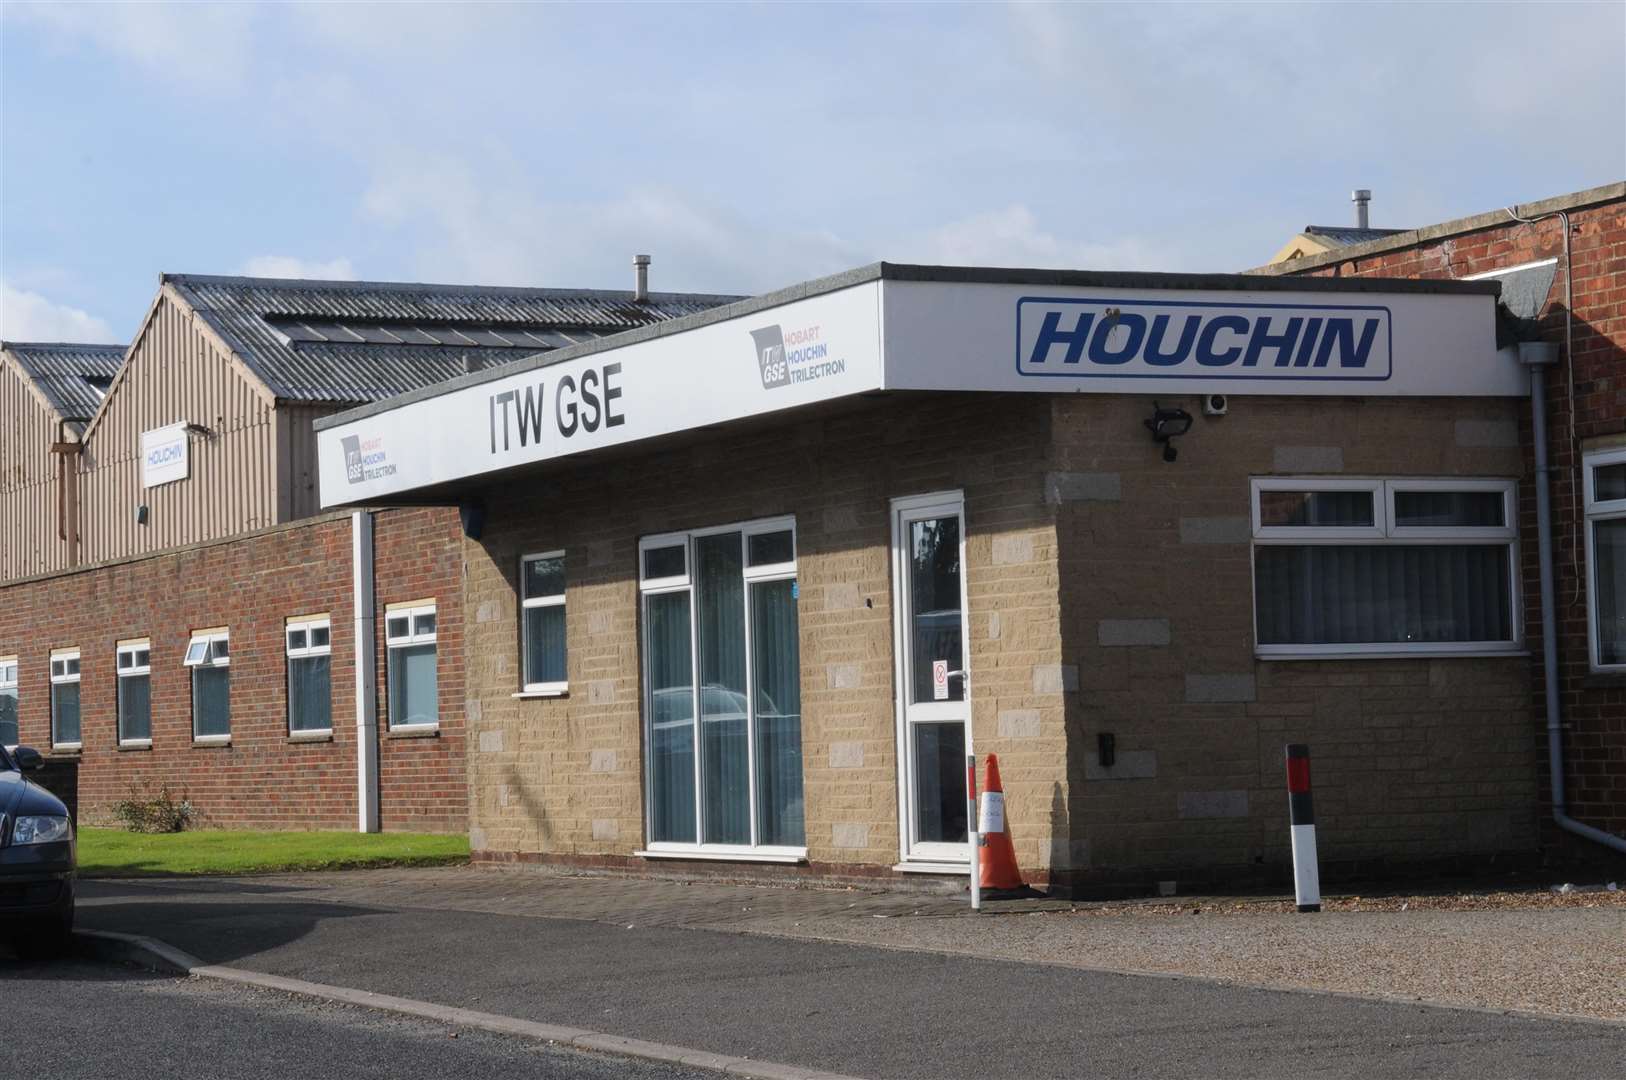 The Houchin site will be demolished if the plan gets the green light